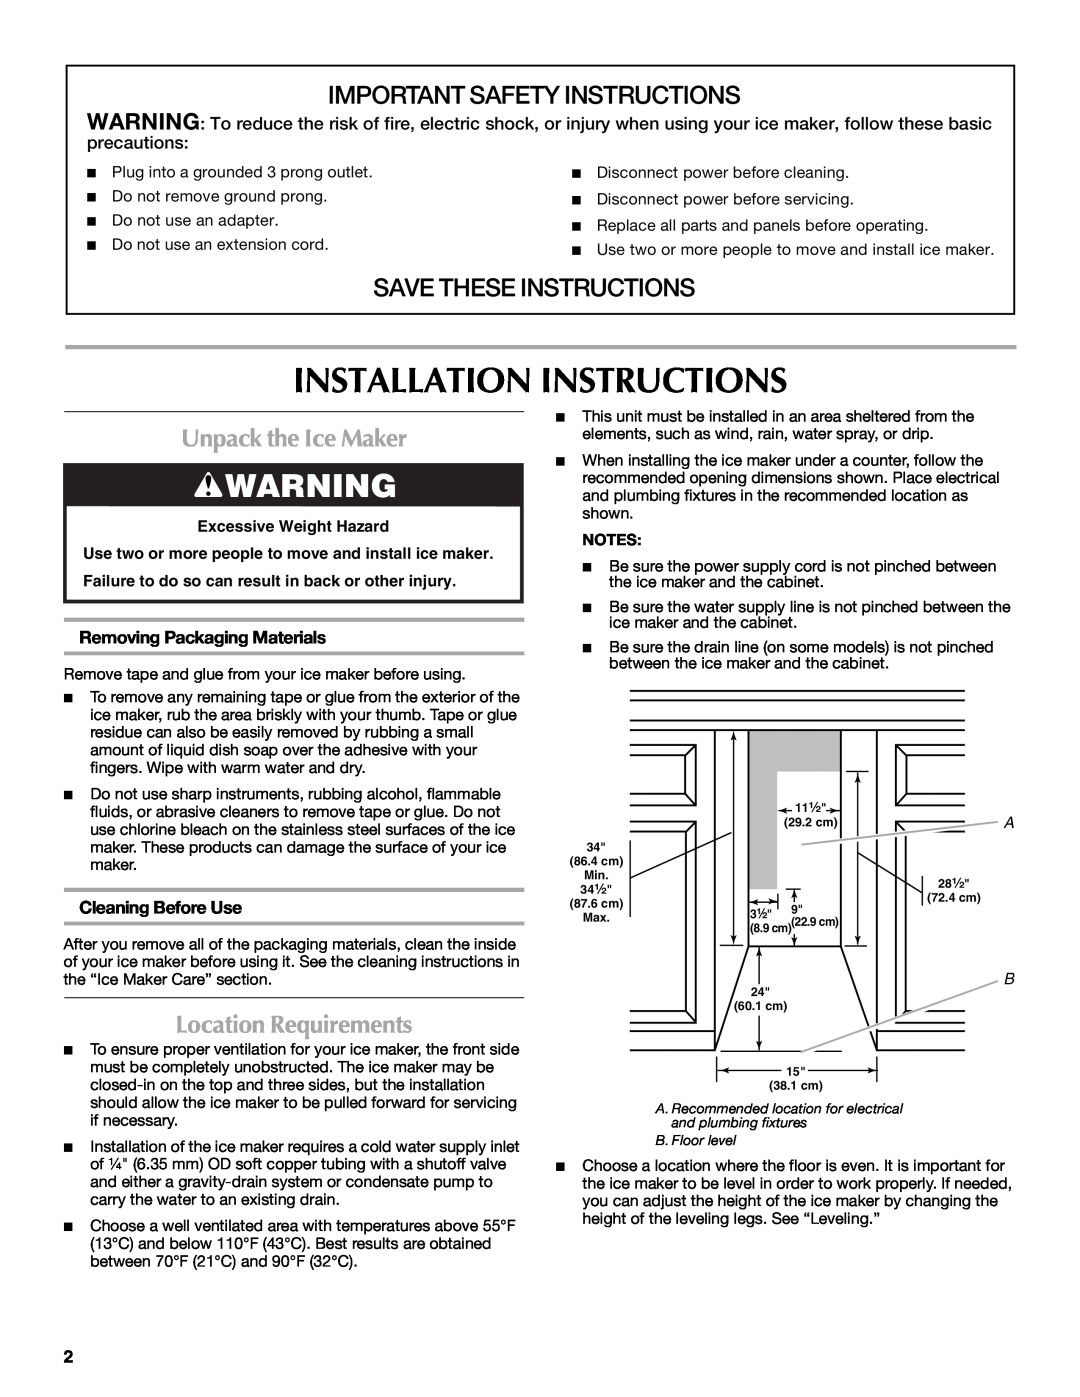 Maytag MIM1554WRS Installation Instructions, Important Safety Instructions, Save These Instructions, Unpack the Ice Maker 